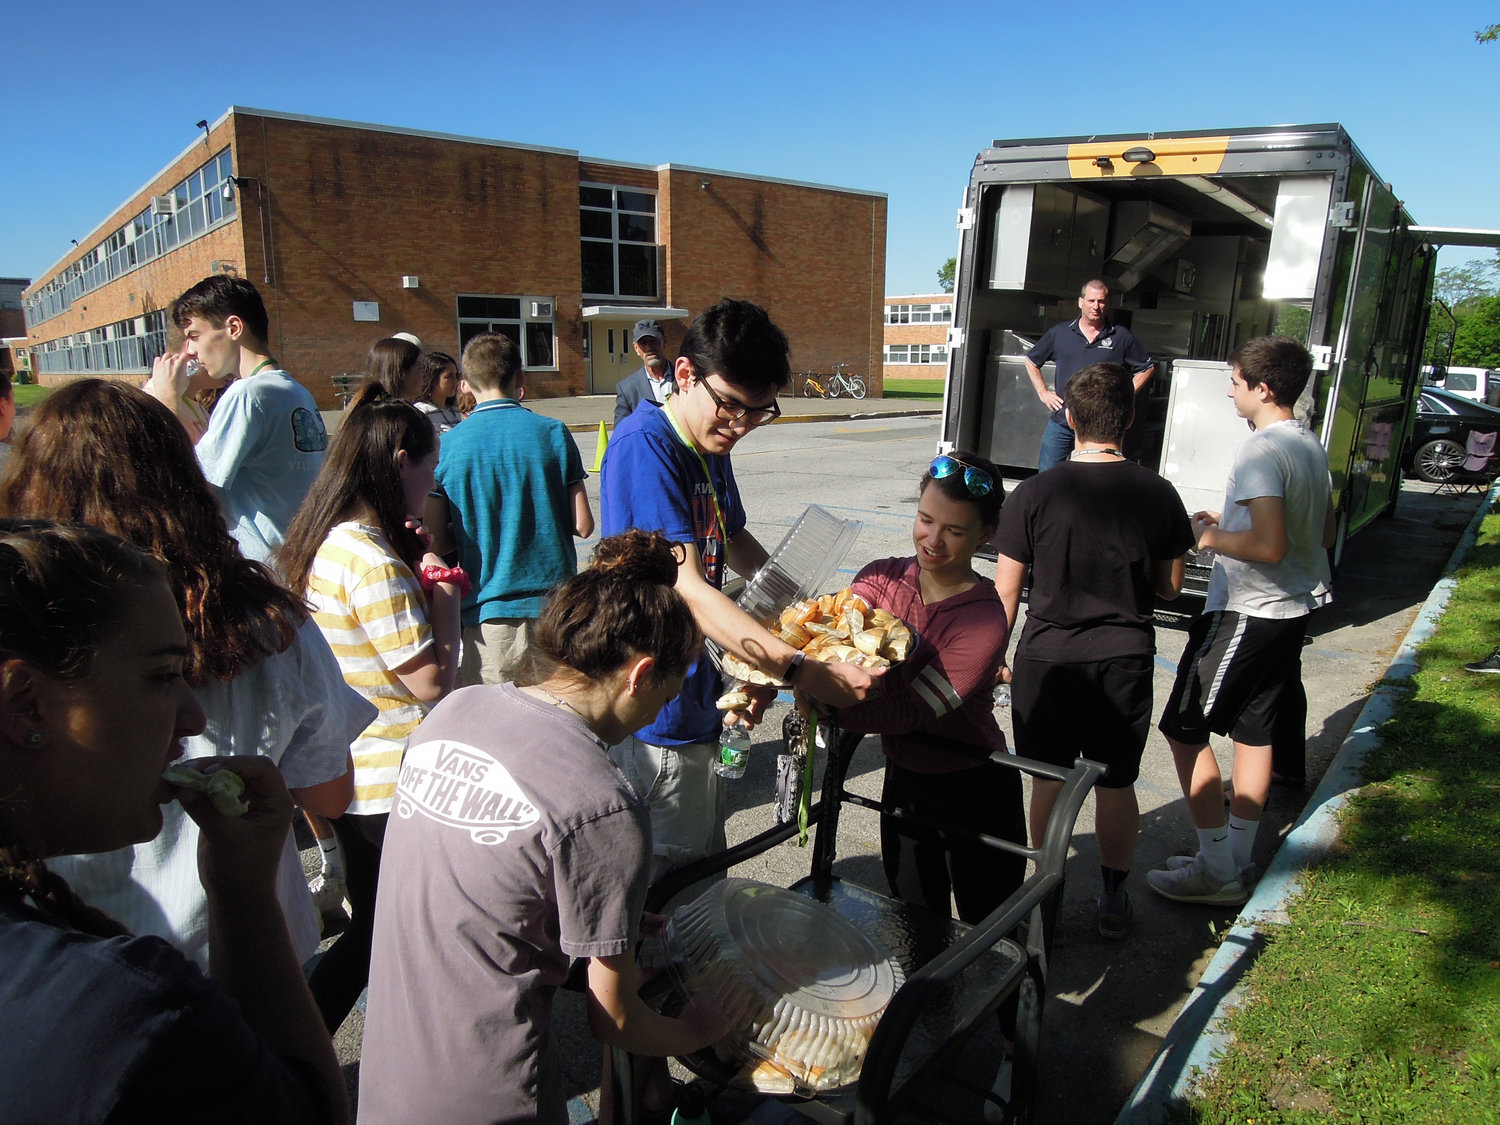 Seaford High School students helped themselves to bagels and beverages as Robbins looked on.